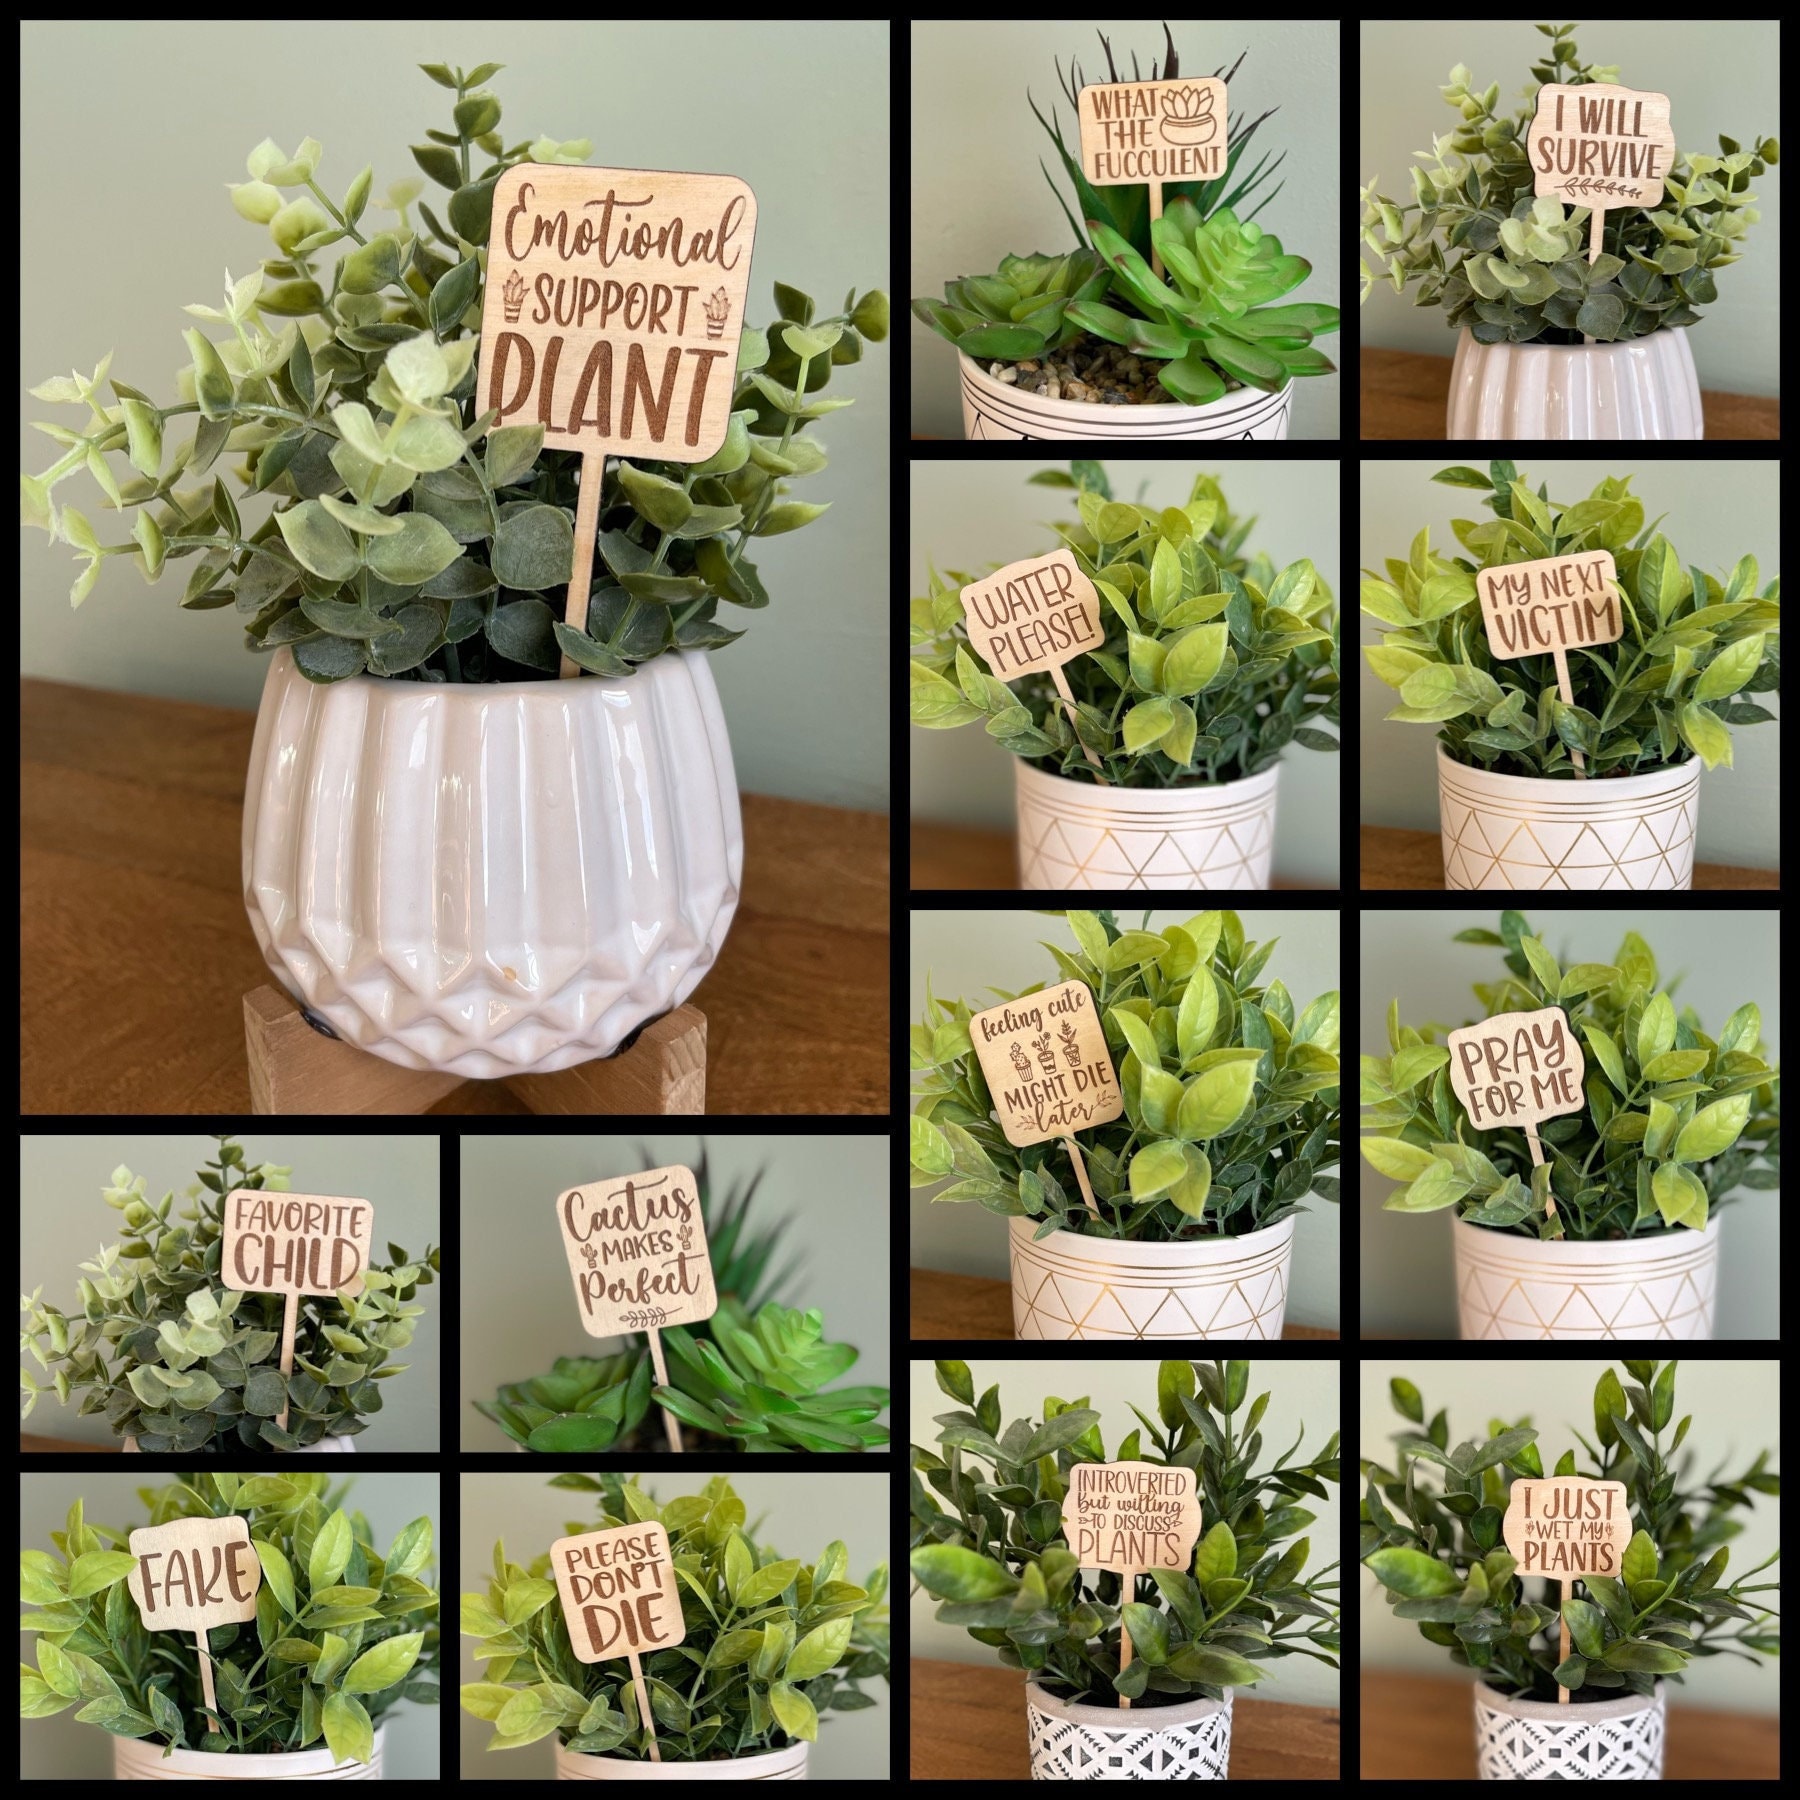 12. Funny Plant Markers